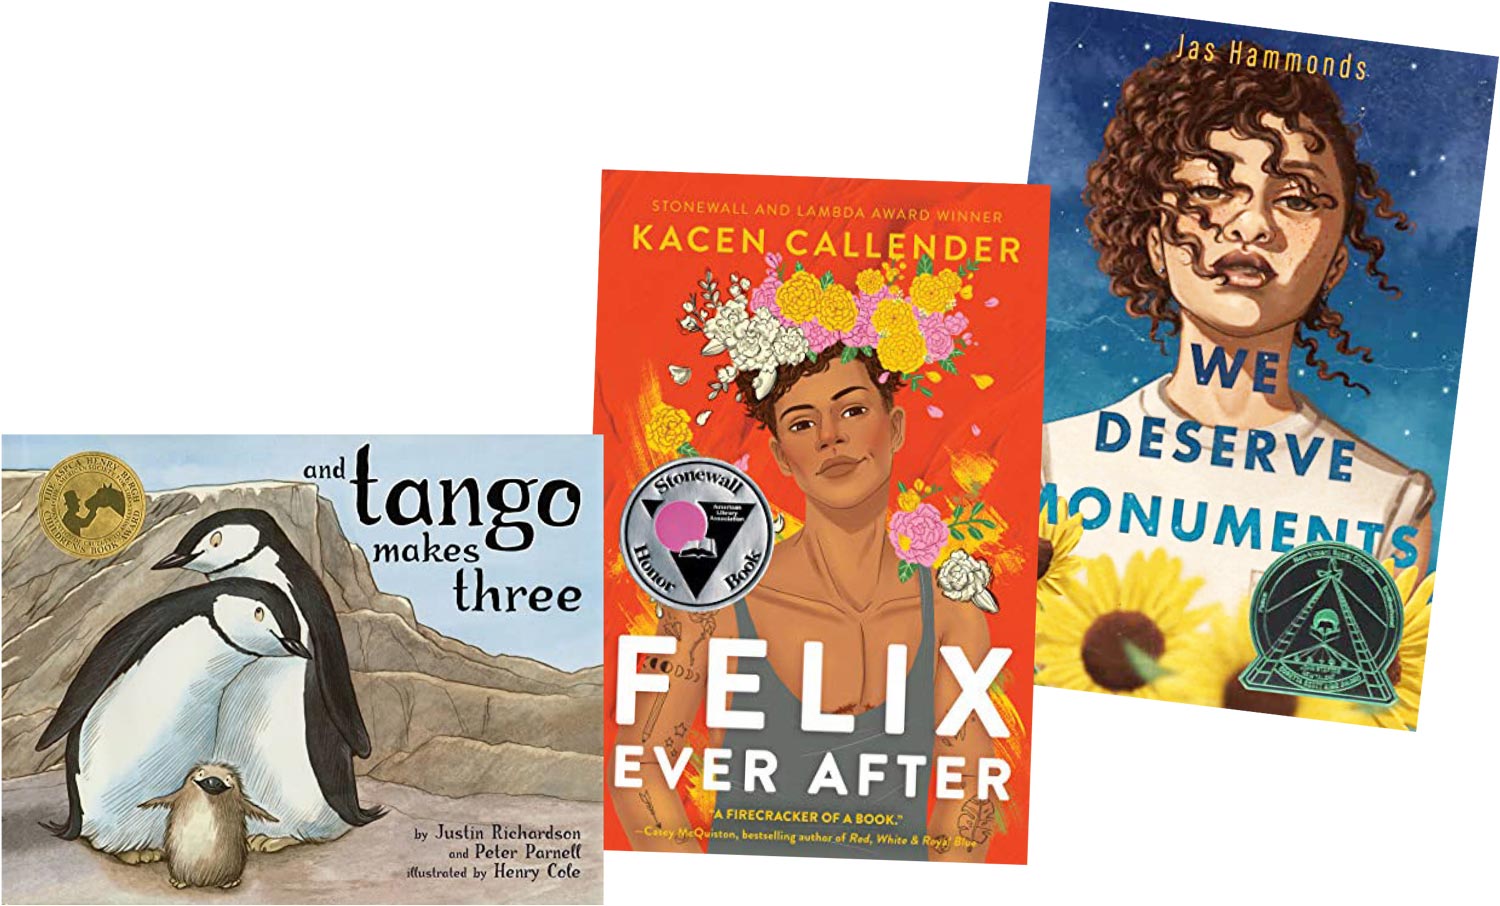 book covers of "And Tango Make Three", "Felix Ever After", and "We Deserve Monuments"